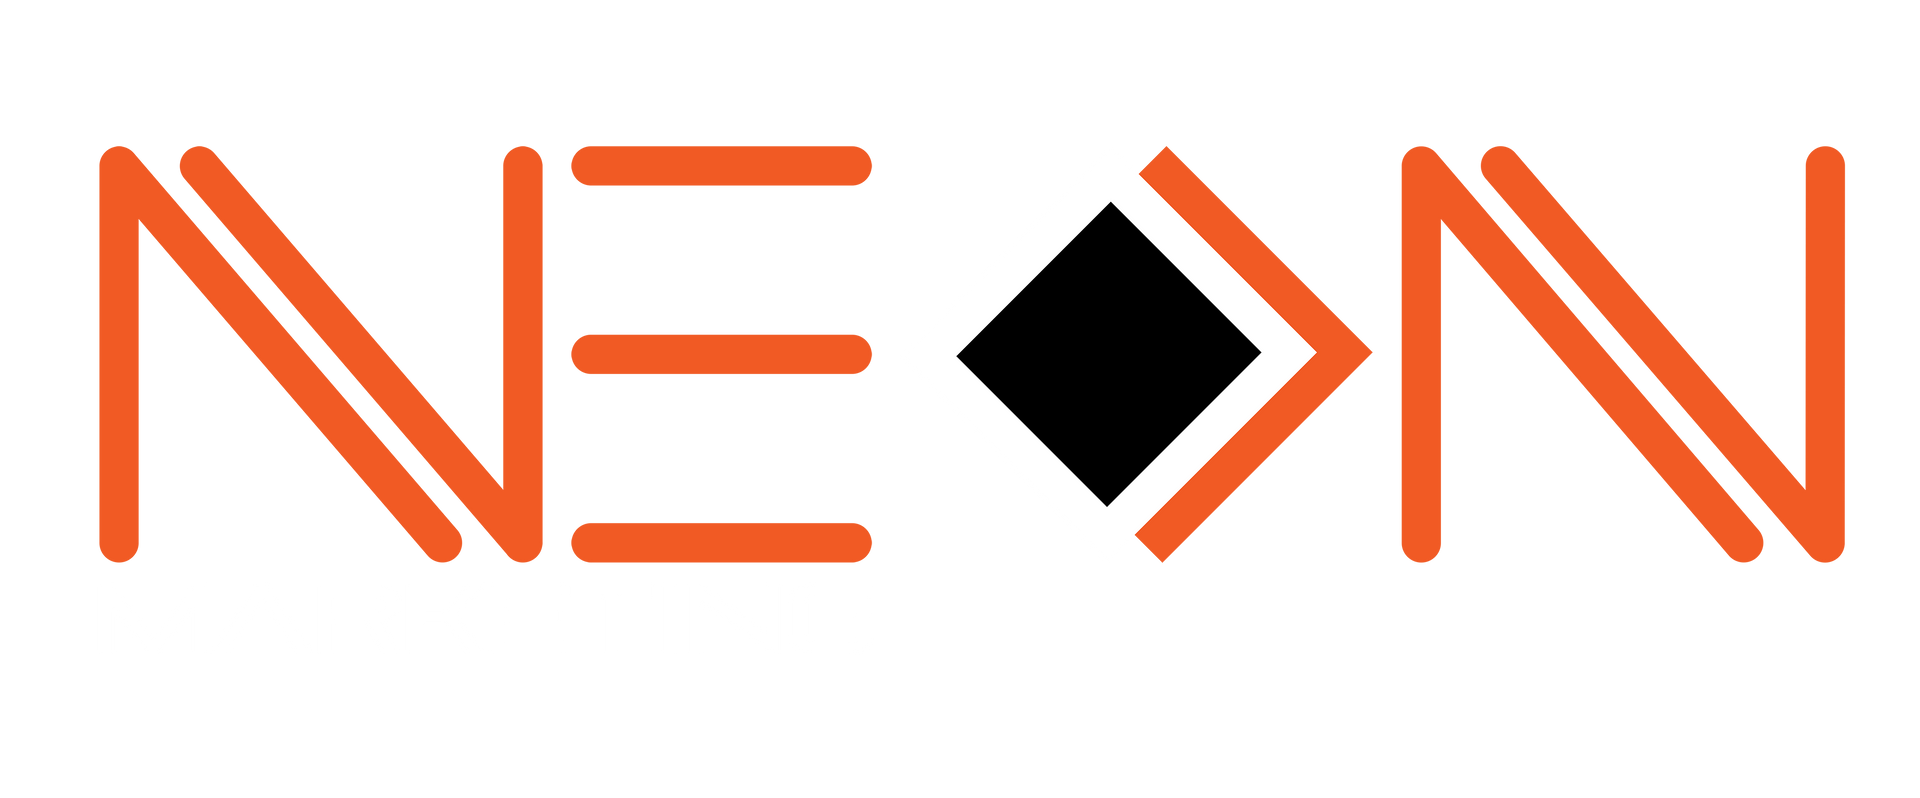 The NEON Marketing Logo against a black background.